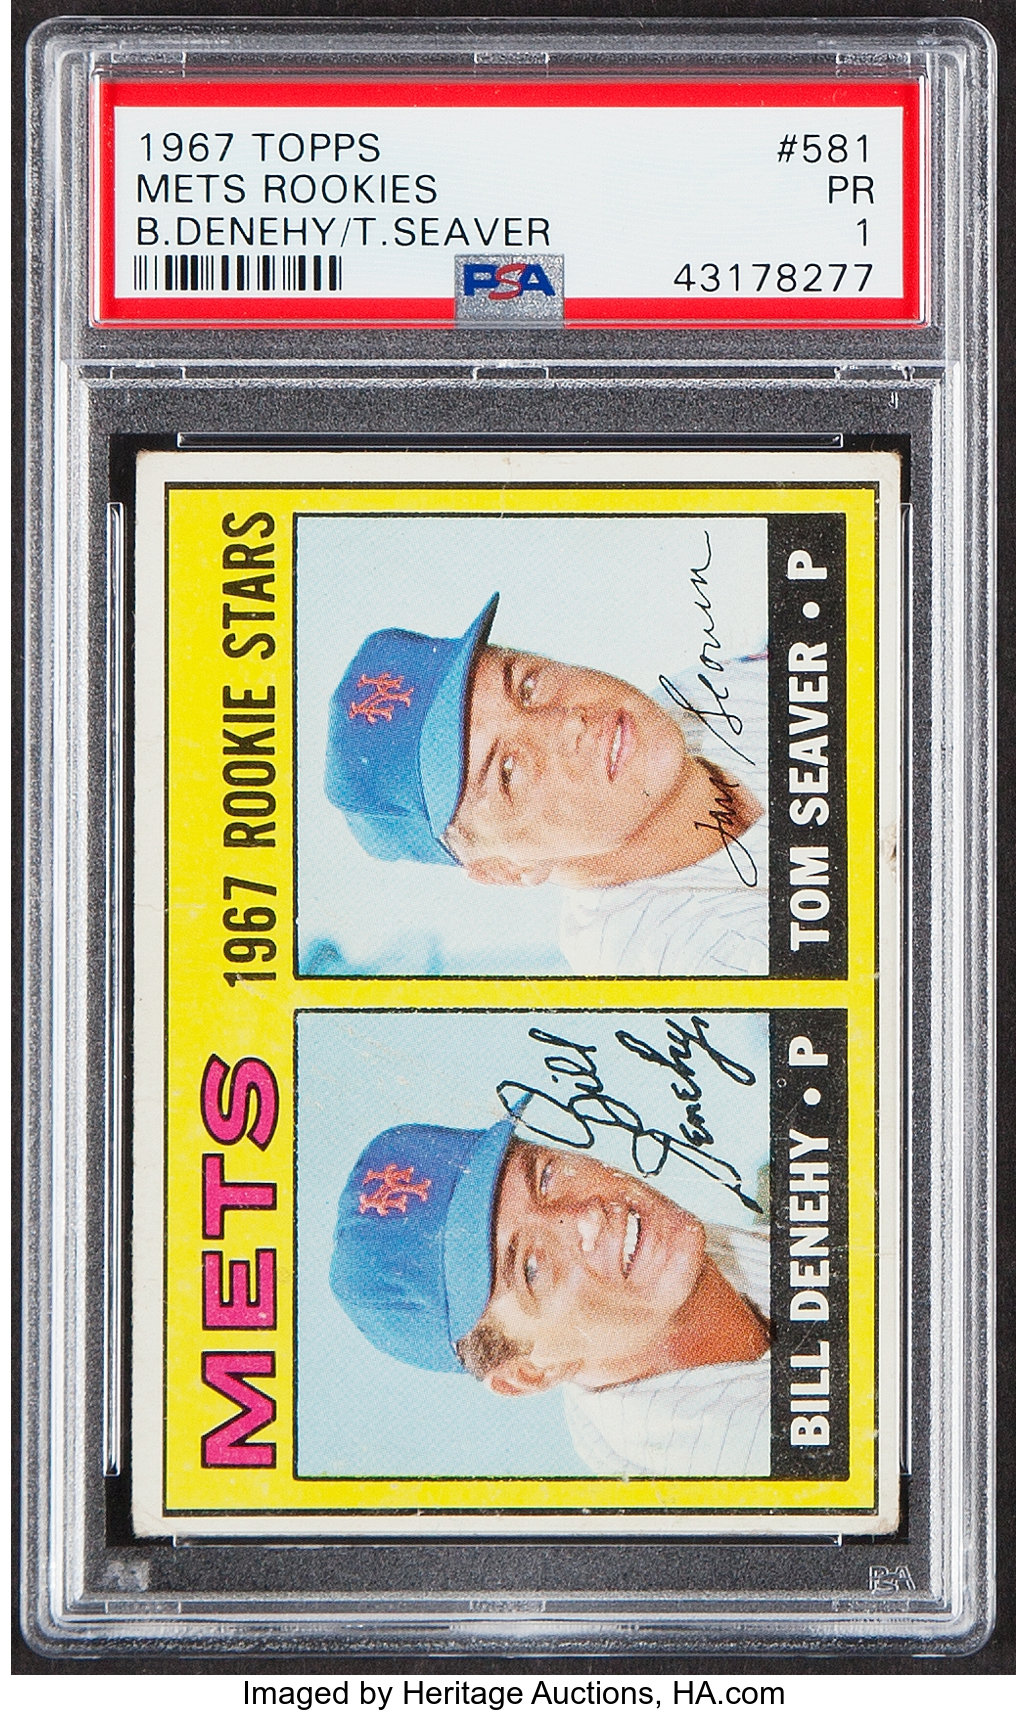 Sold at Auction: 1967 Topps Tom Seaver #581 PSA 6 Rookie